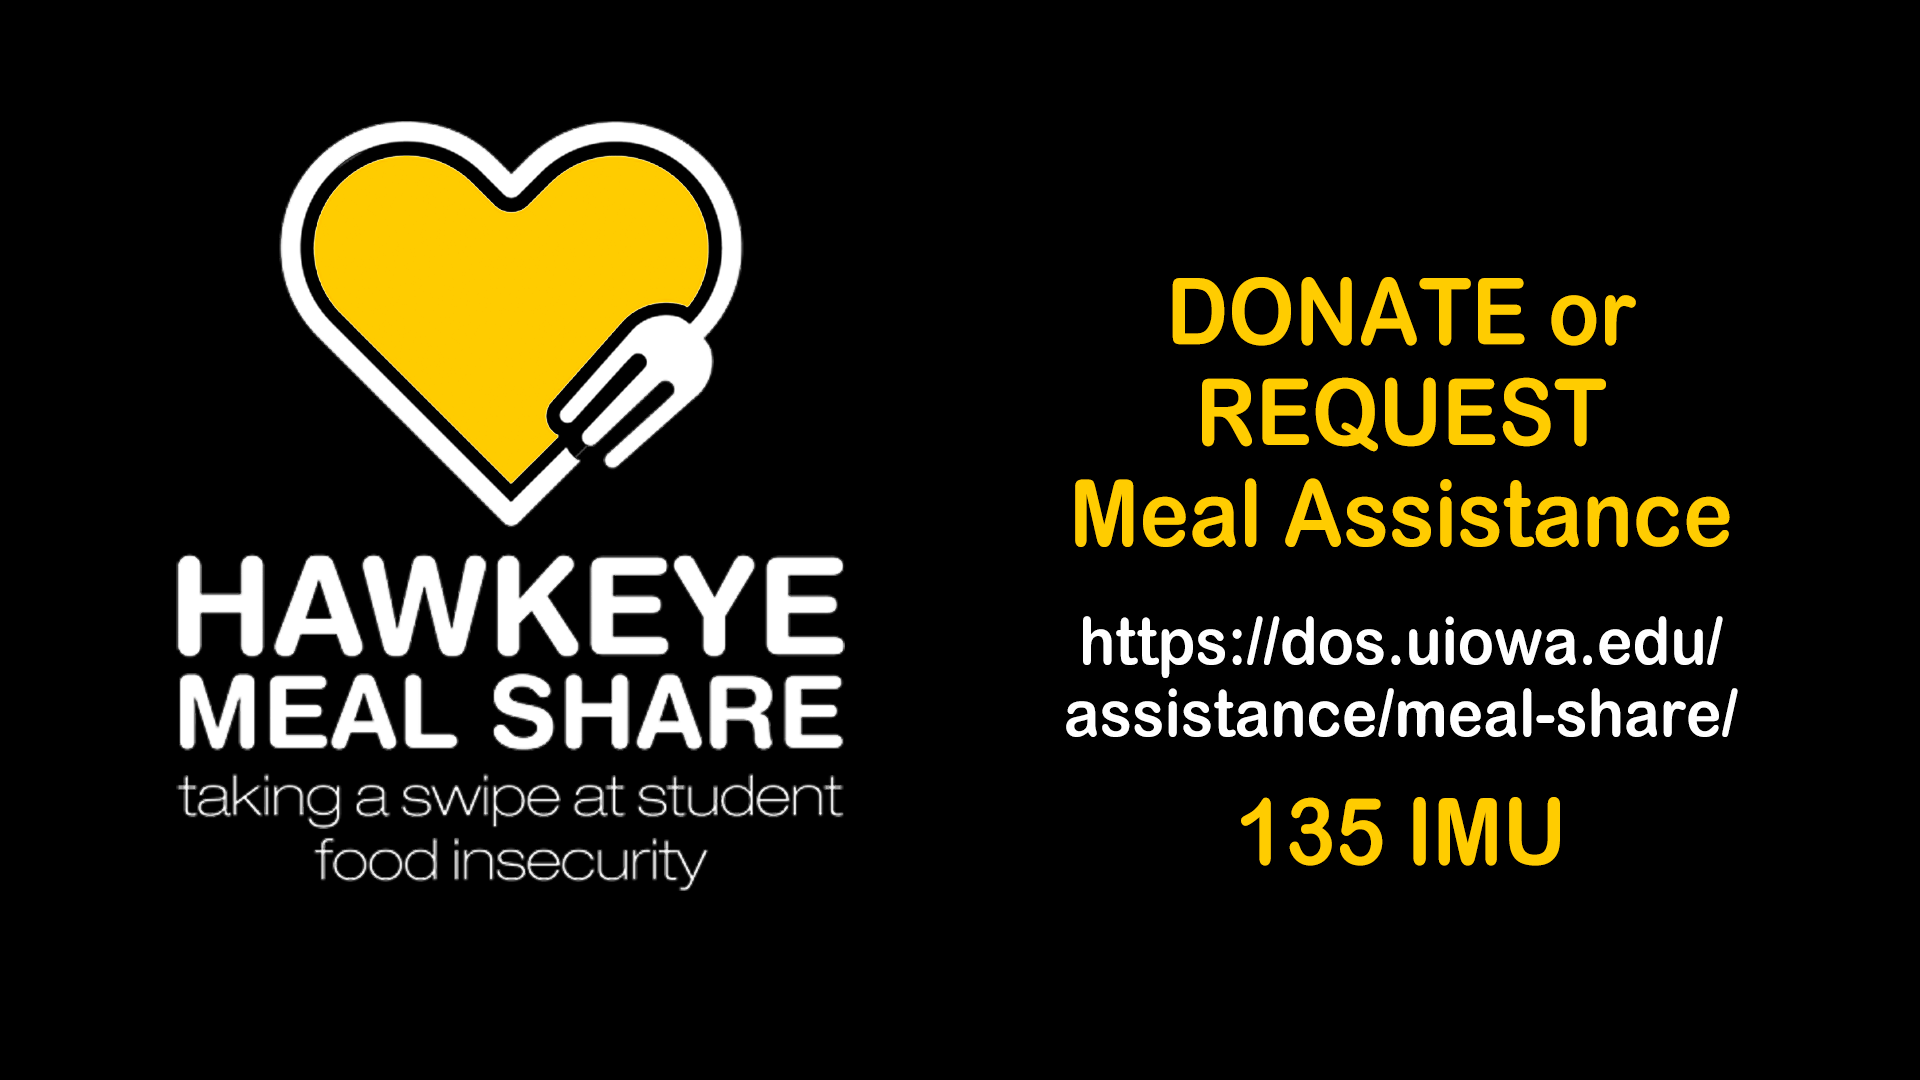 Hawkeye Meal Share - taking a swipe at student food insecurity. Donate or Request Meal Assistance, visit: https://dos.uiowa.edu/assistance/meal-share or visit us in 135 IMU.